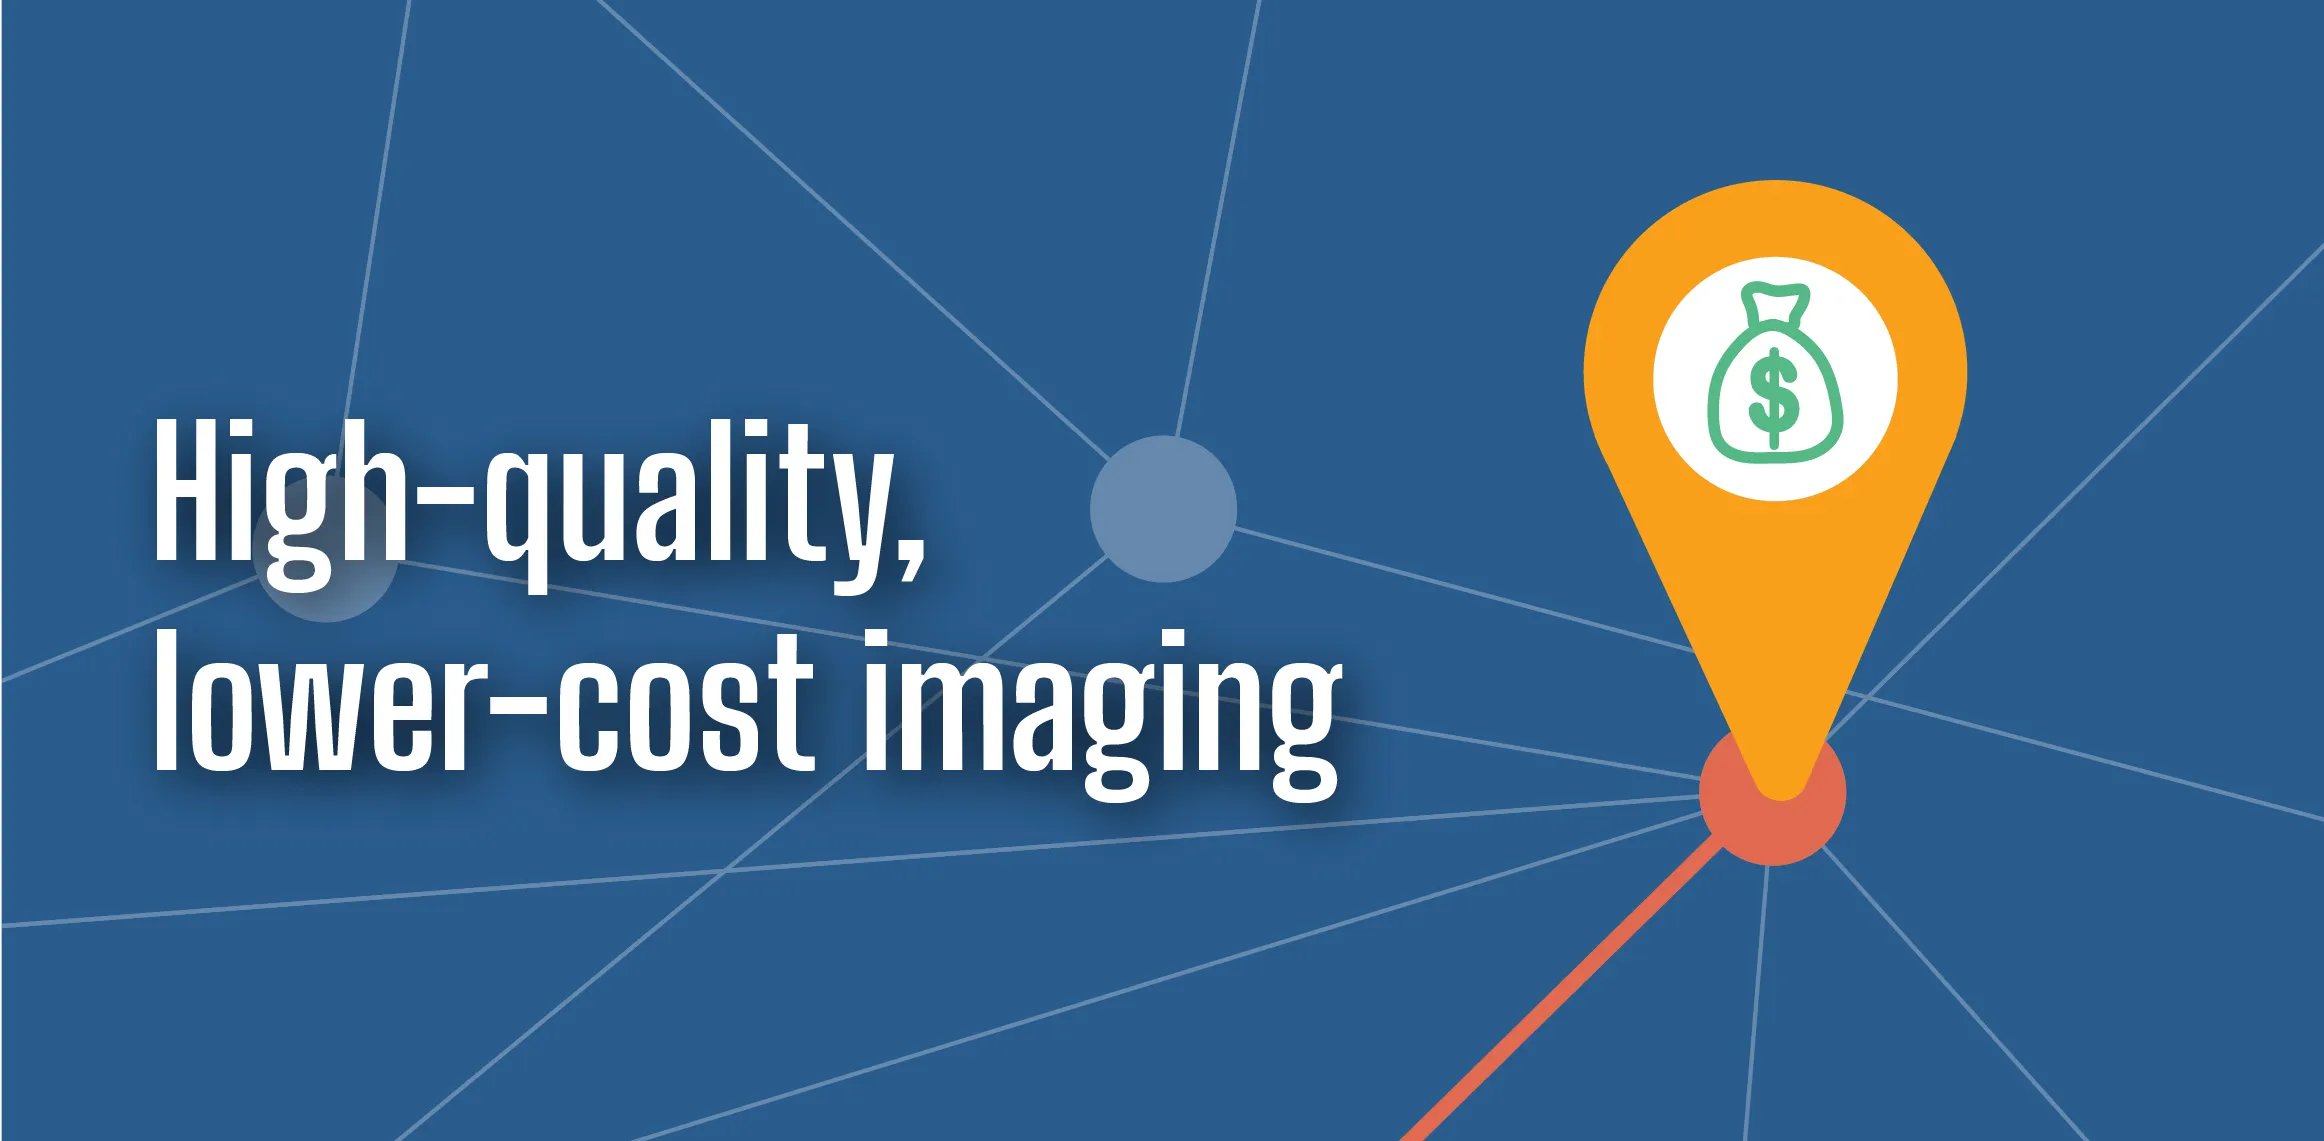 Rockland and Orange Counties High-quality, lower-cost Imaging